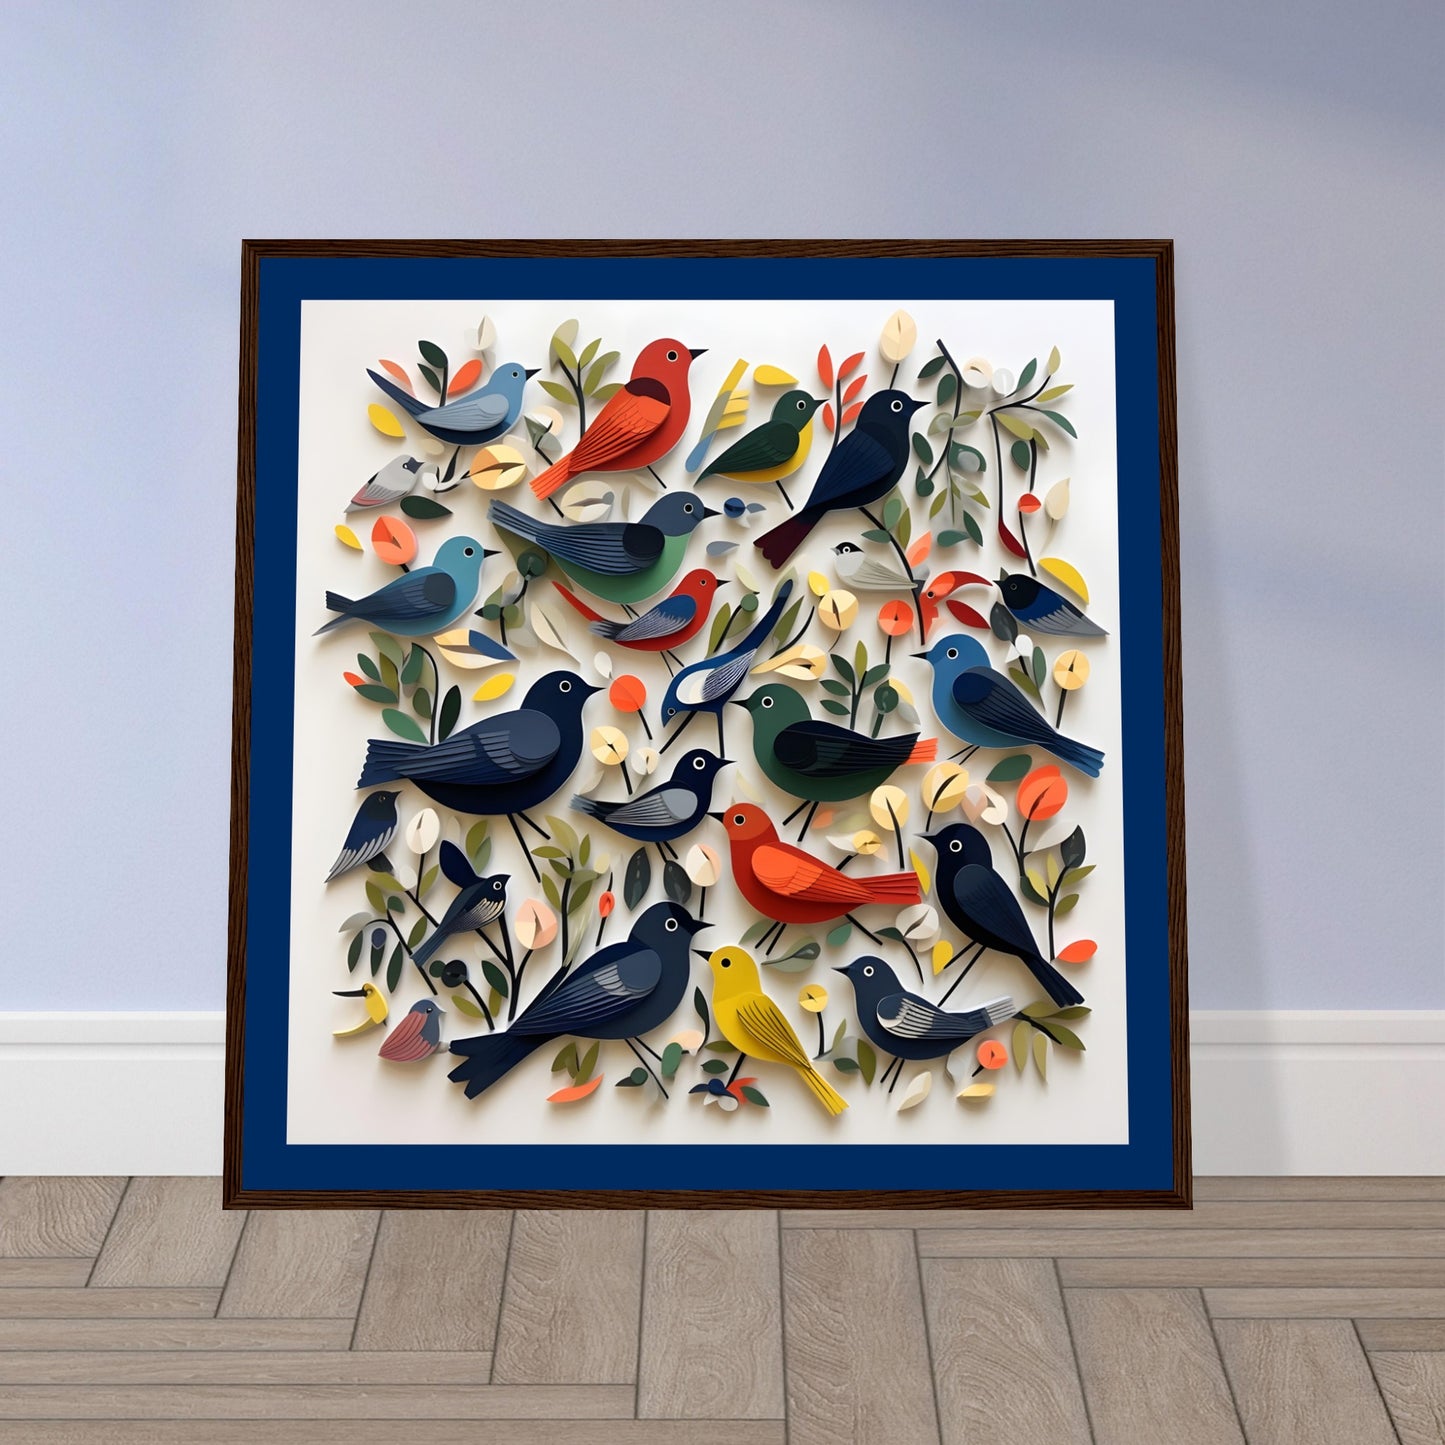 COLORFUL BIRDS 02 on Premium Semi-Glossy Paper Wooden Framed Poster